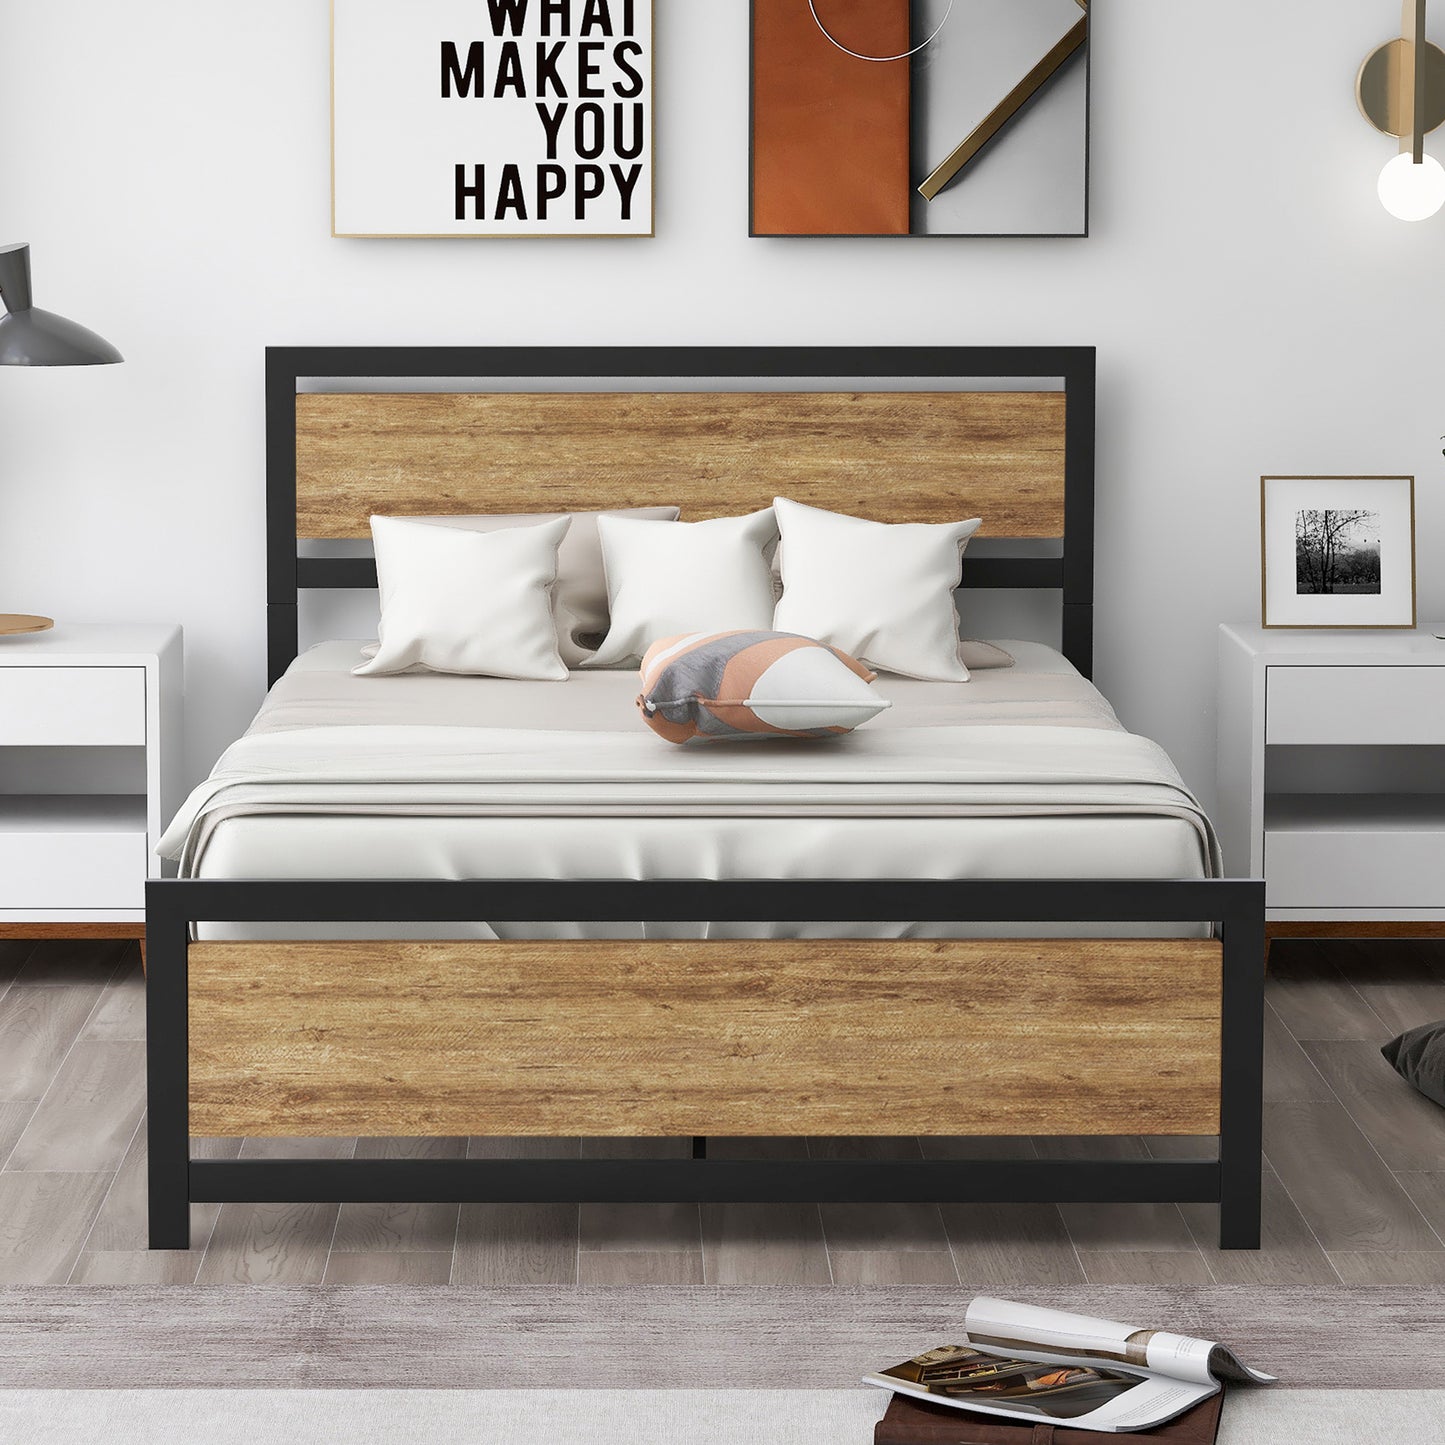 SYNGAR Full Size Metal Platform Bed Frame with Industrial Headboard, Steel Legs, Underbed Storage, Bedroom Furnitrue with Strong Slat Support, No Box Spring Needed, Black